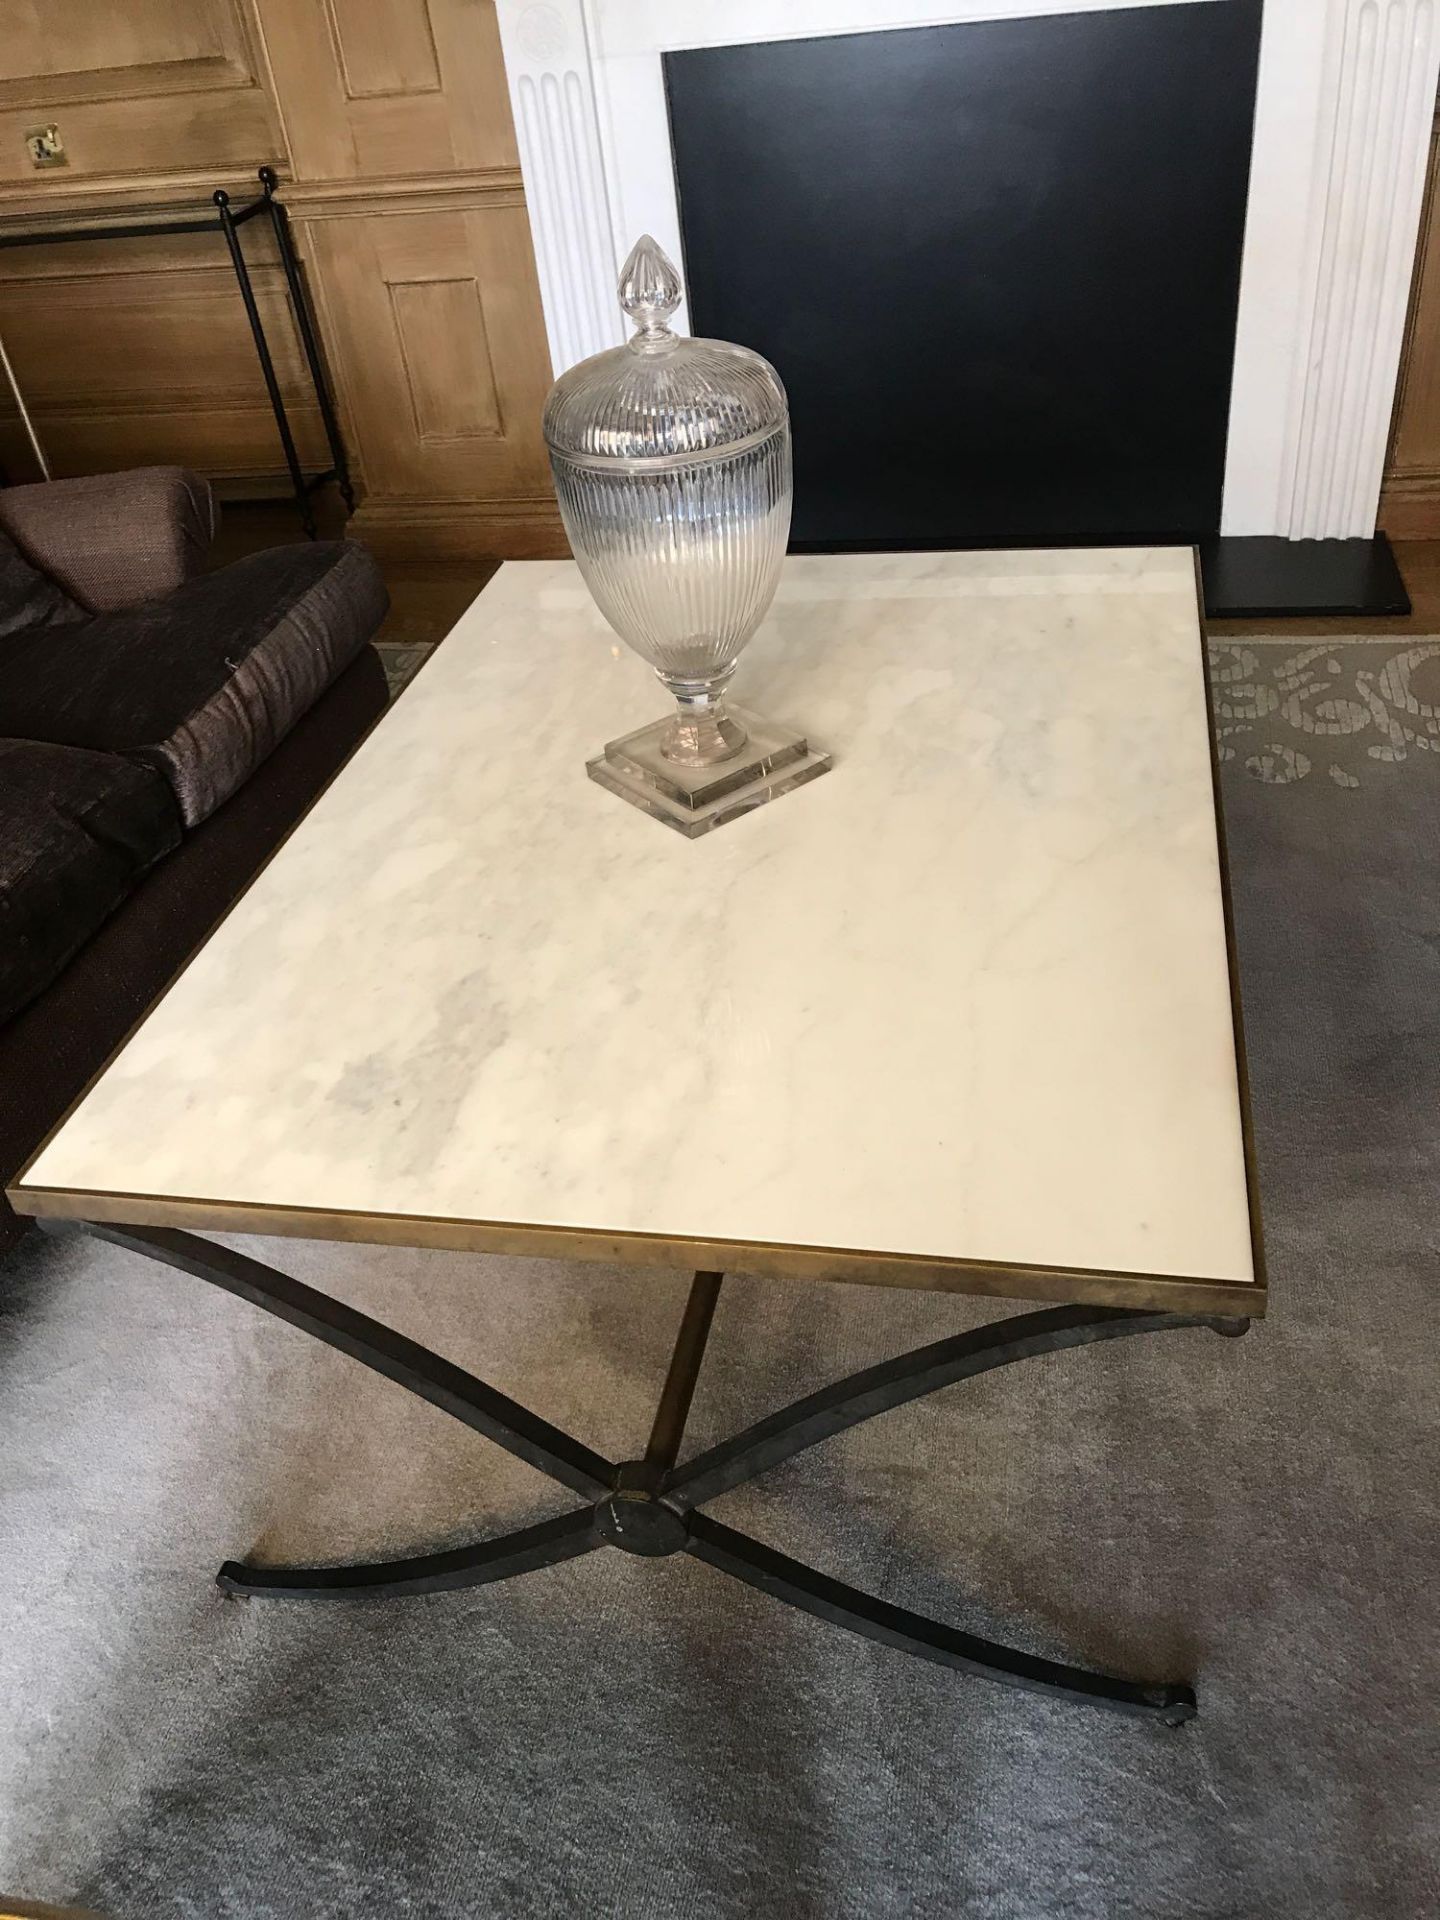 Bevelled White Marble Coffee Table With Bronzed Frame Criss-Cross Style Legs And Pole Stretcher